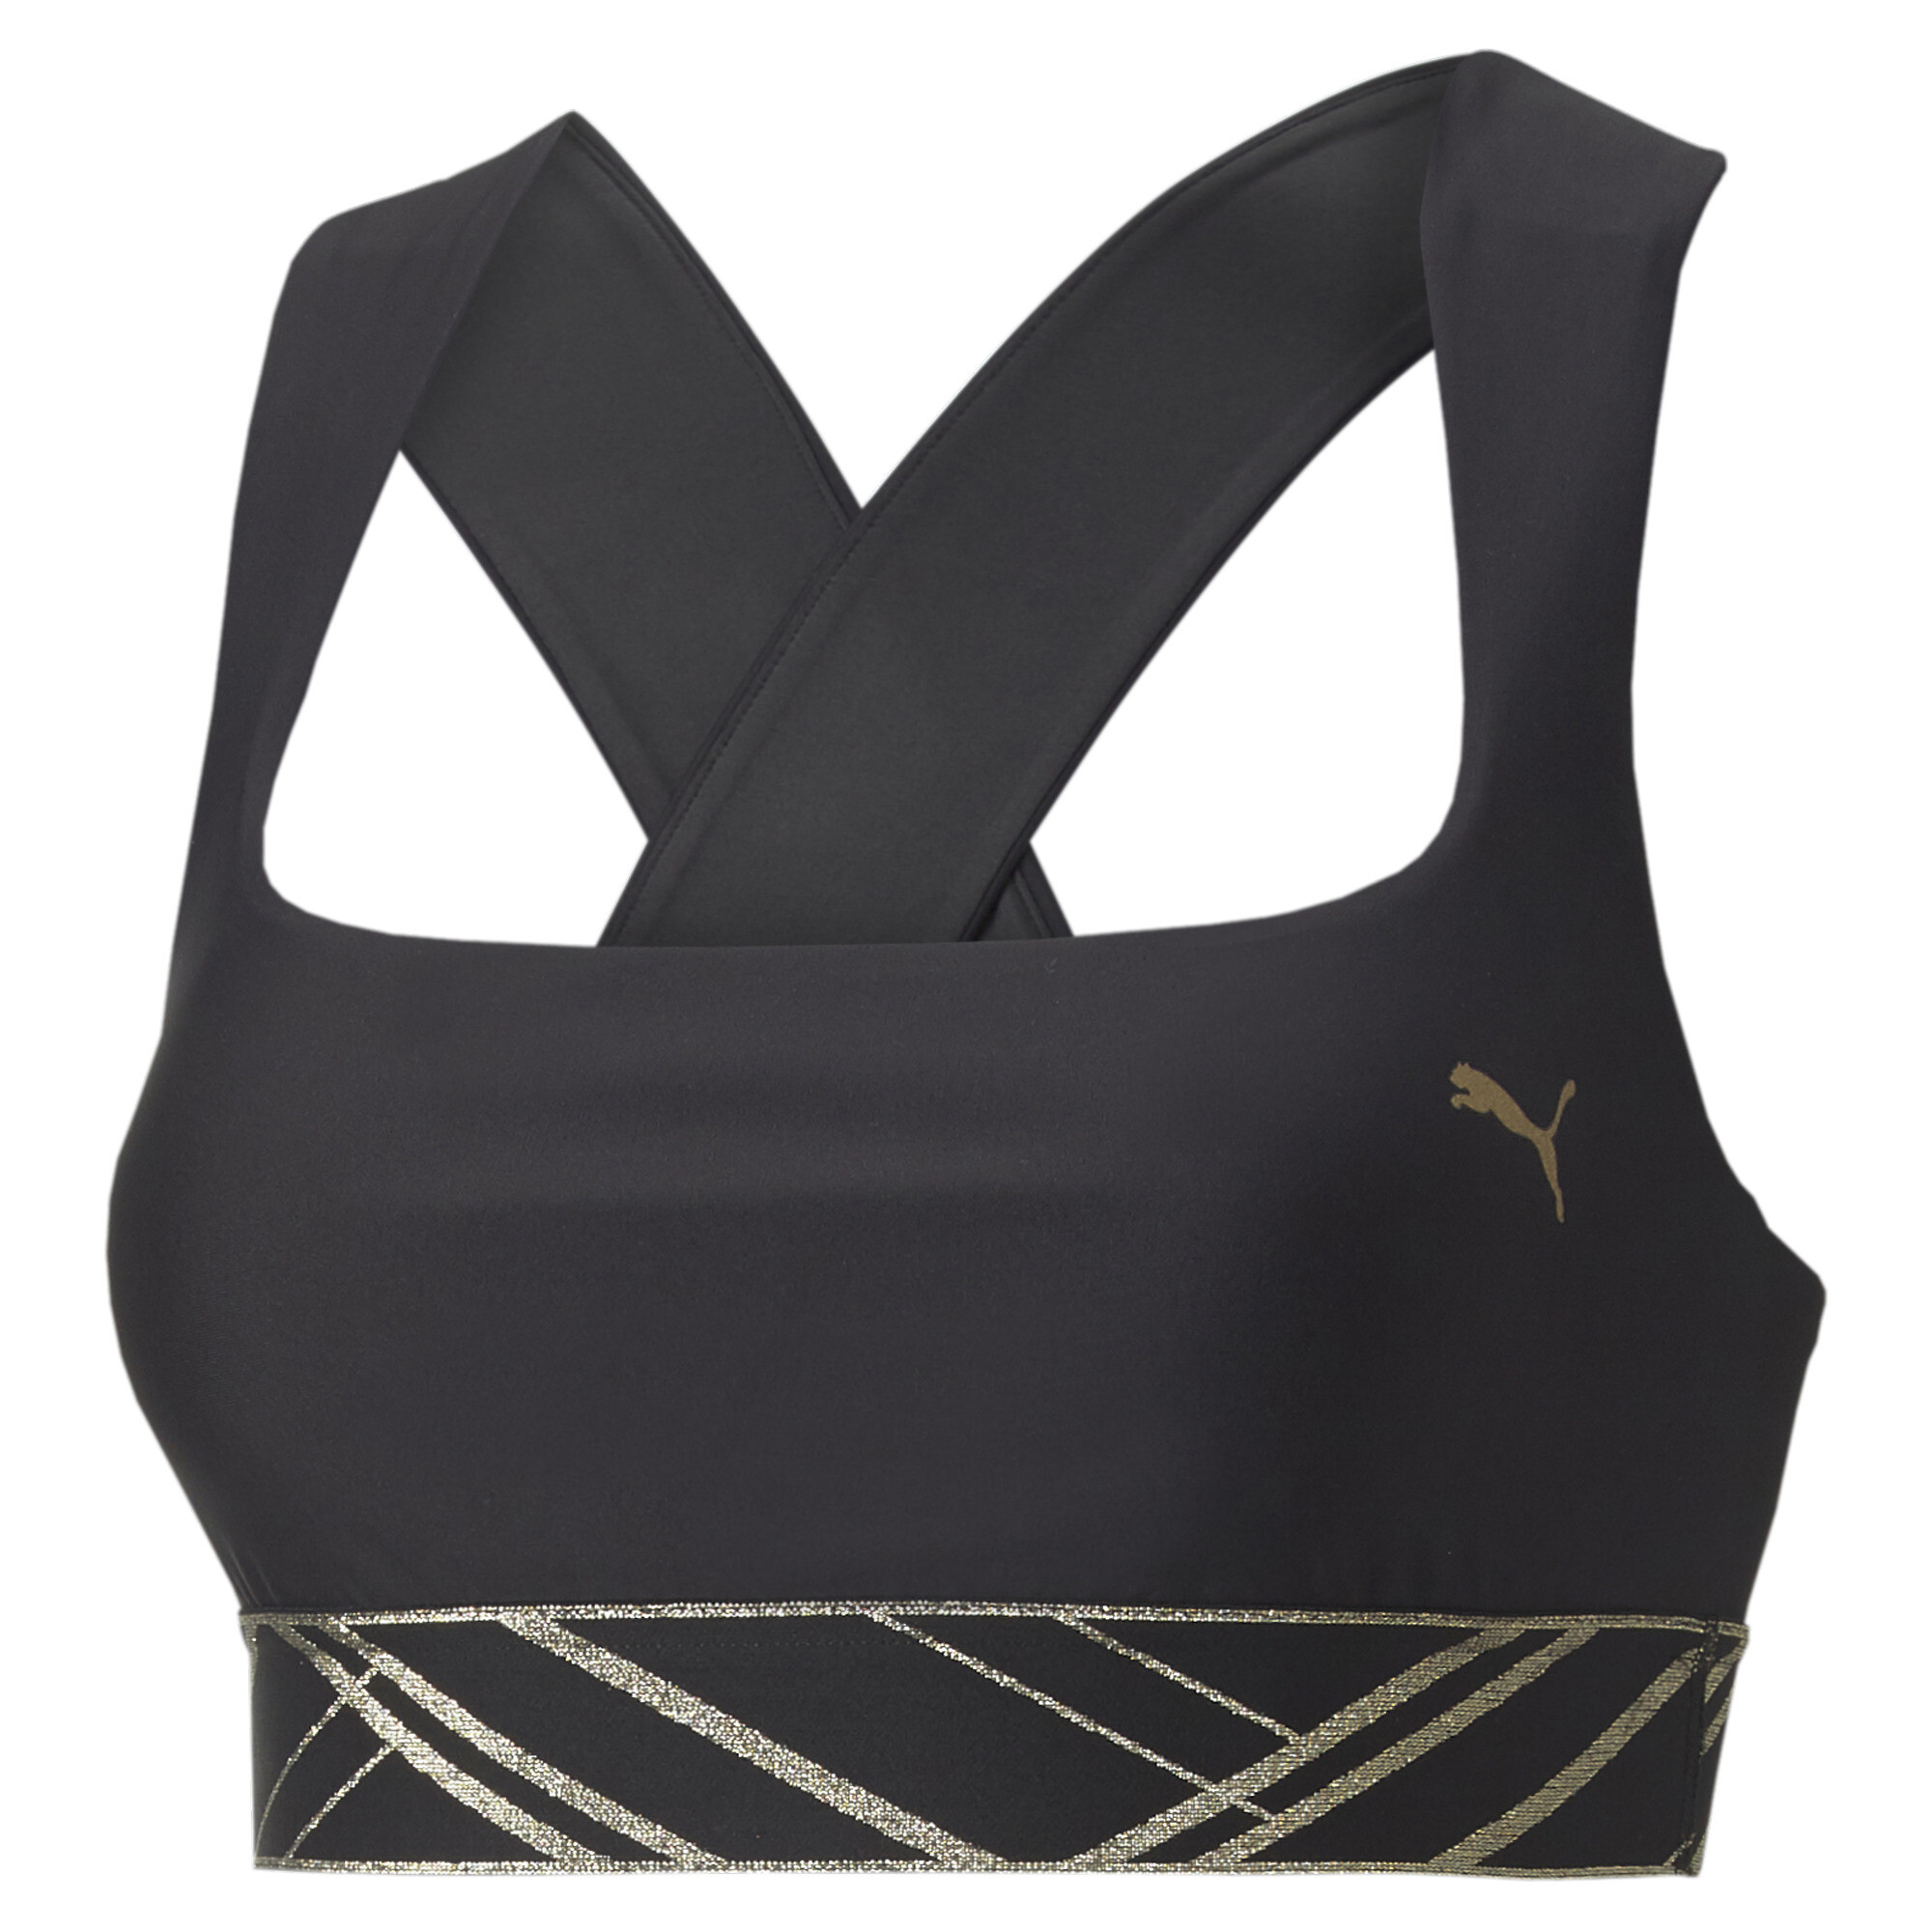 PUMA girls' bras, compare prices and buy online